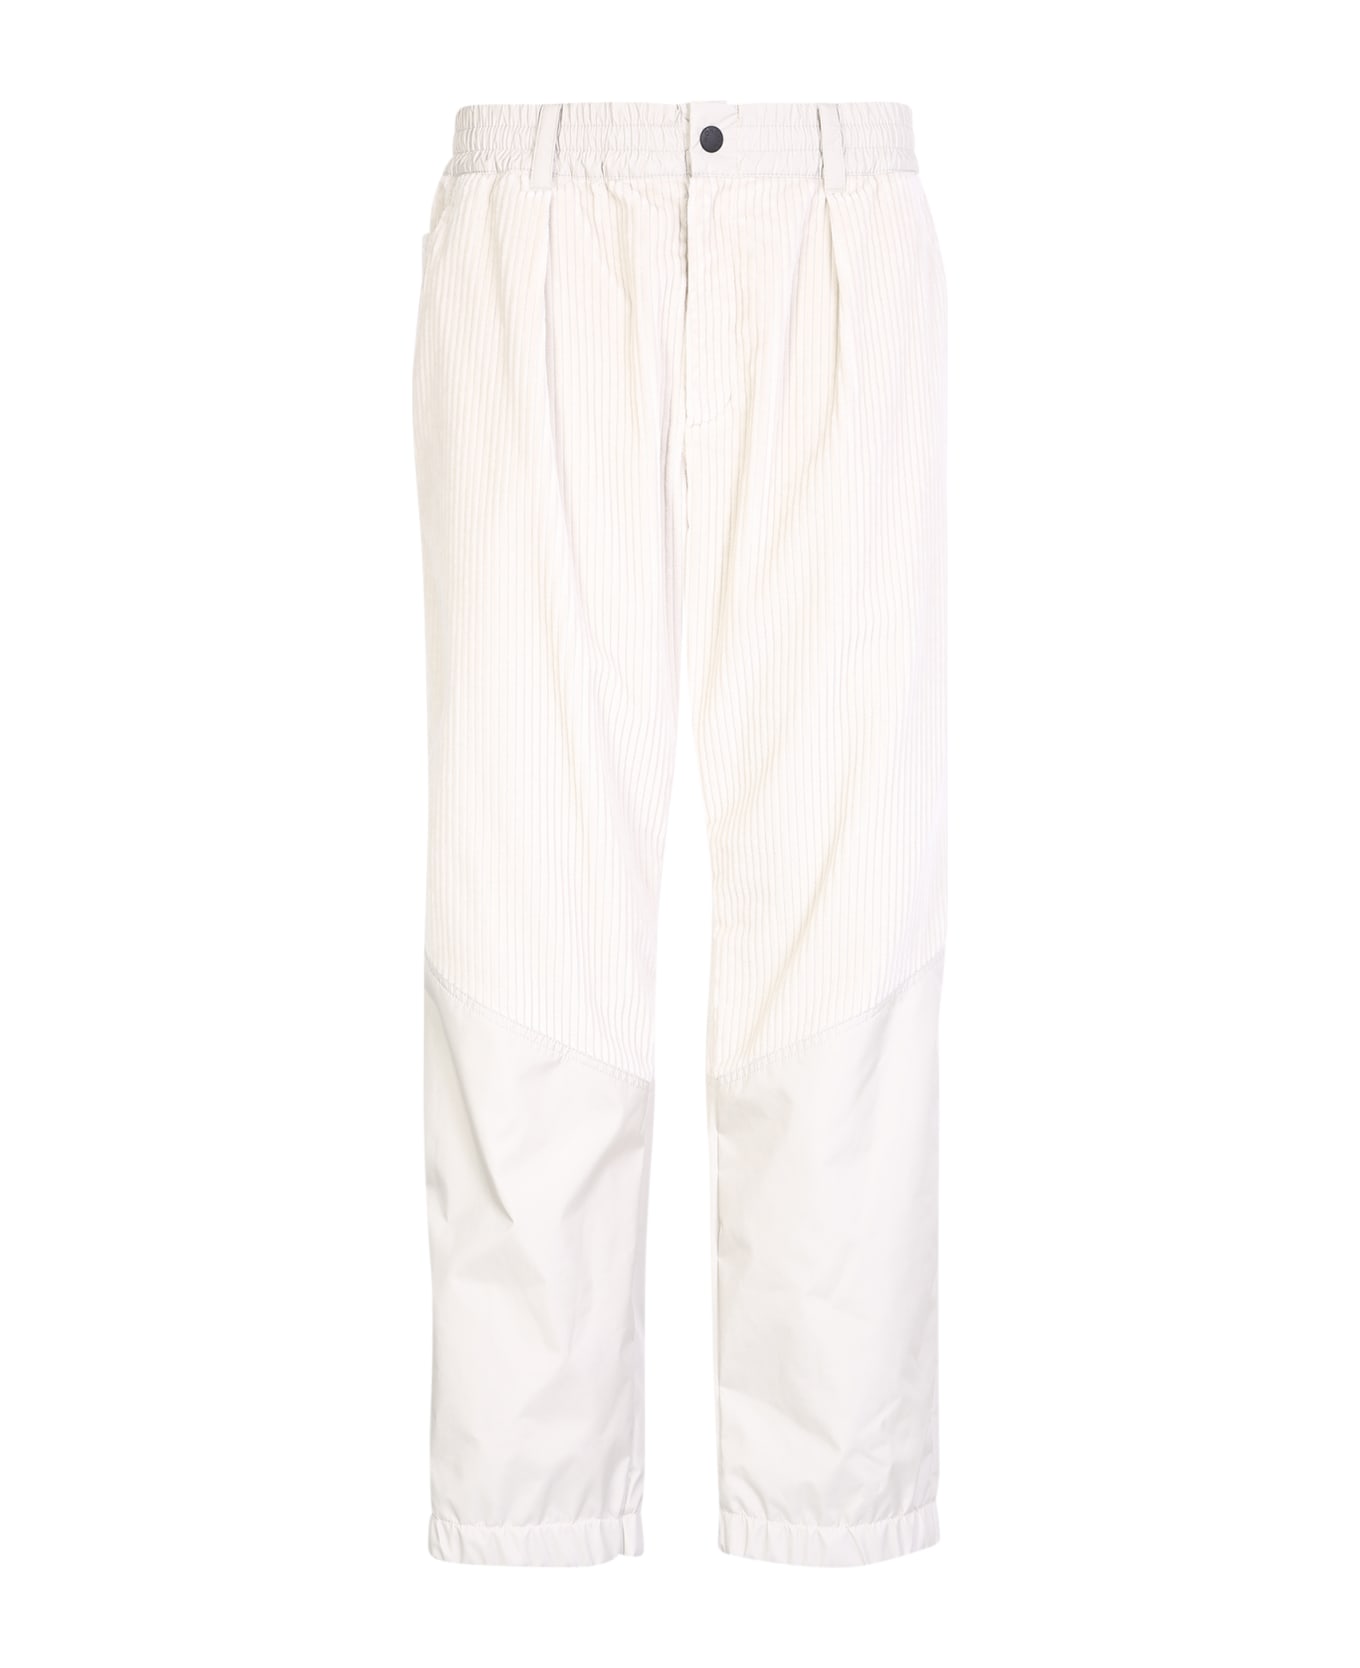 Moncler Grenoble Cream Cotton Blend Trousers - White ボトムス